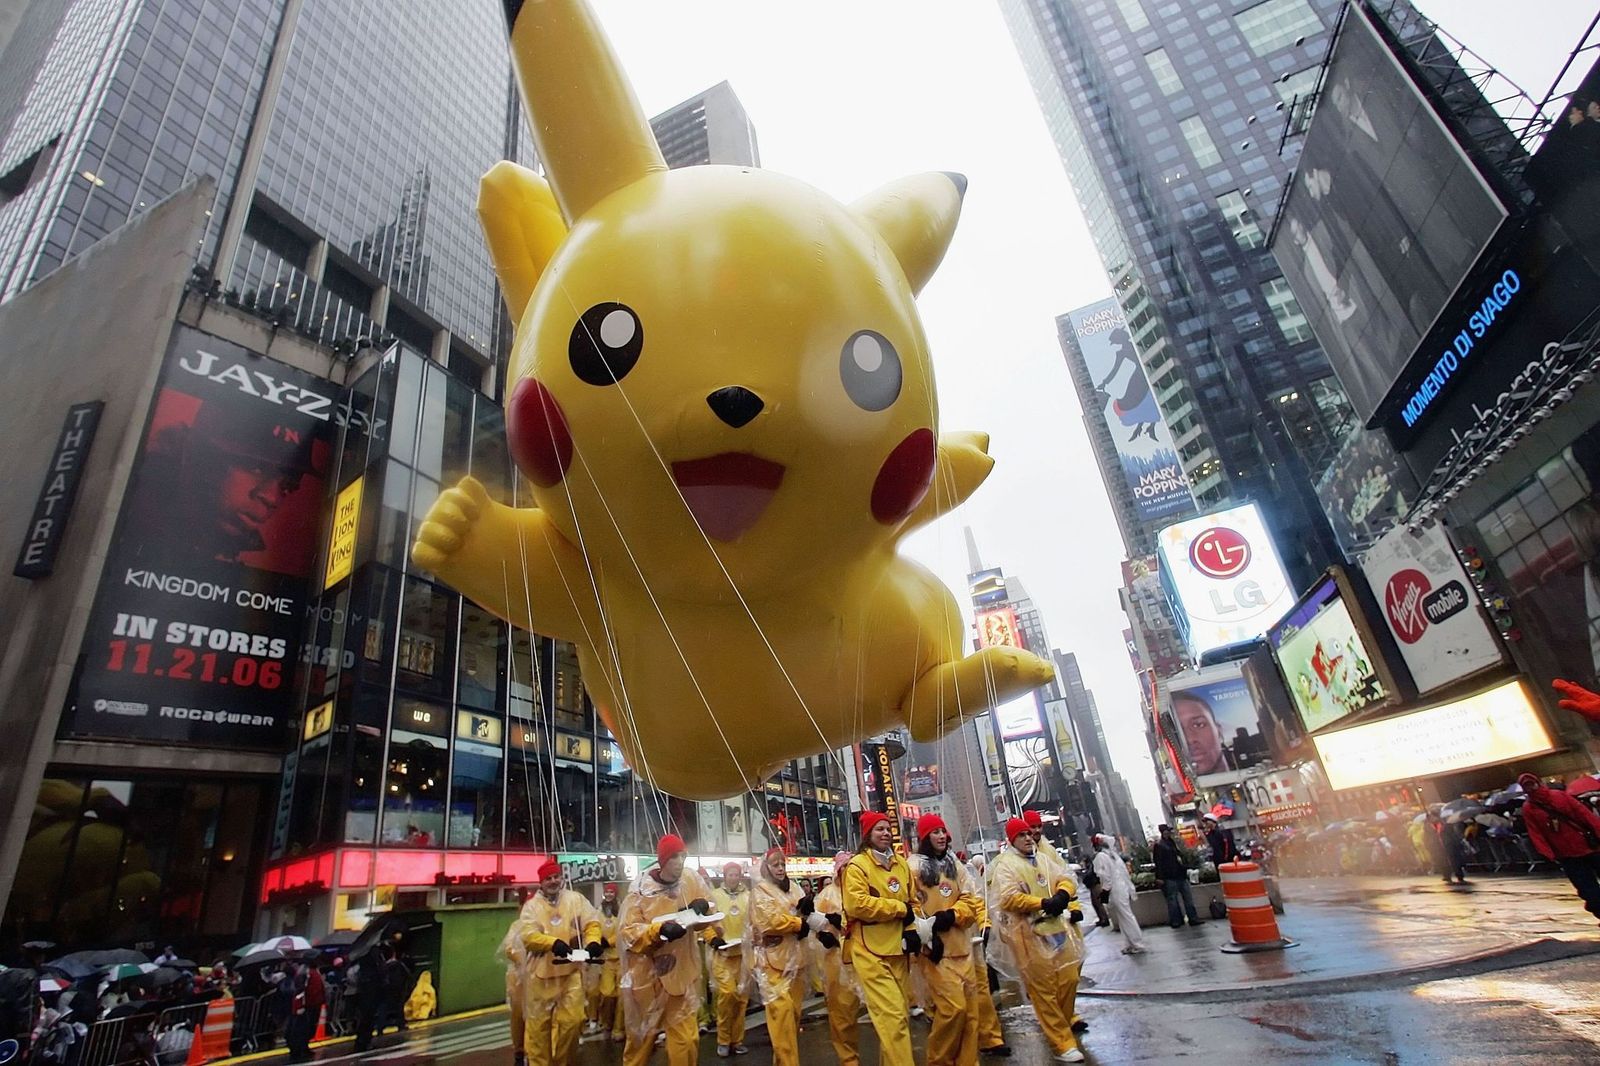 The Pikachu balloon makes its way down a rainy Broadway at the 80th Macy's Thanksgiving Day parade, November 23, 2006 | Photo: Getty Images